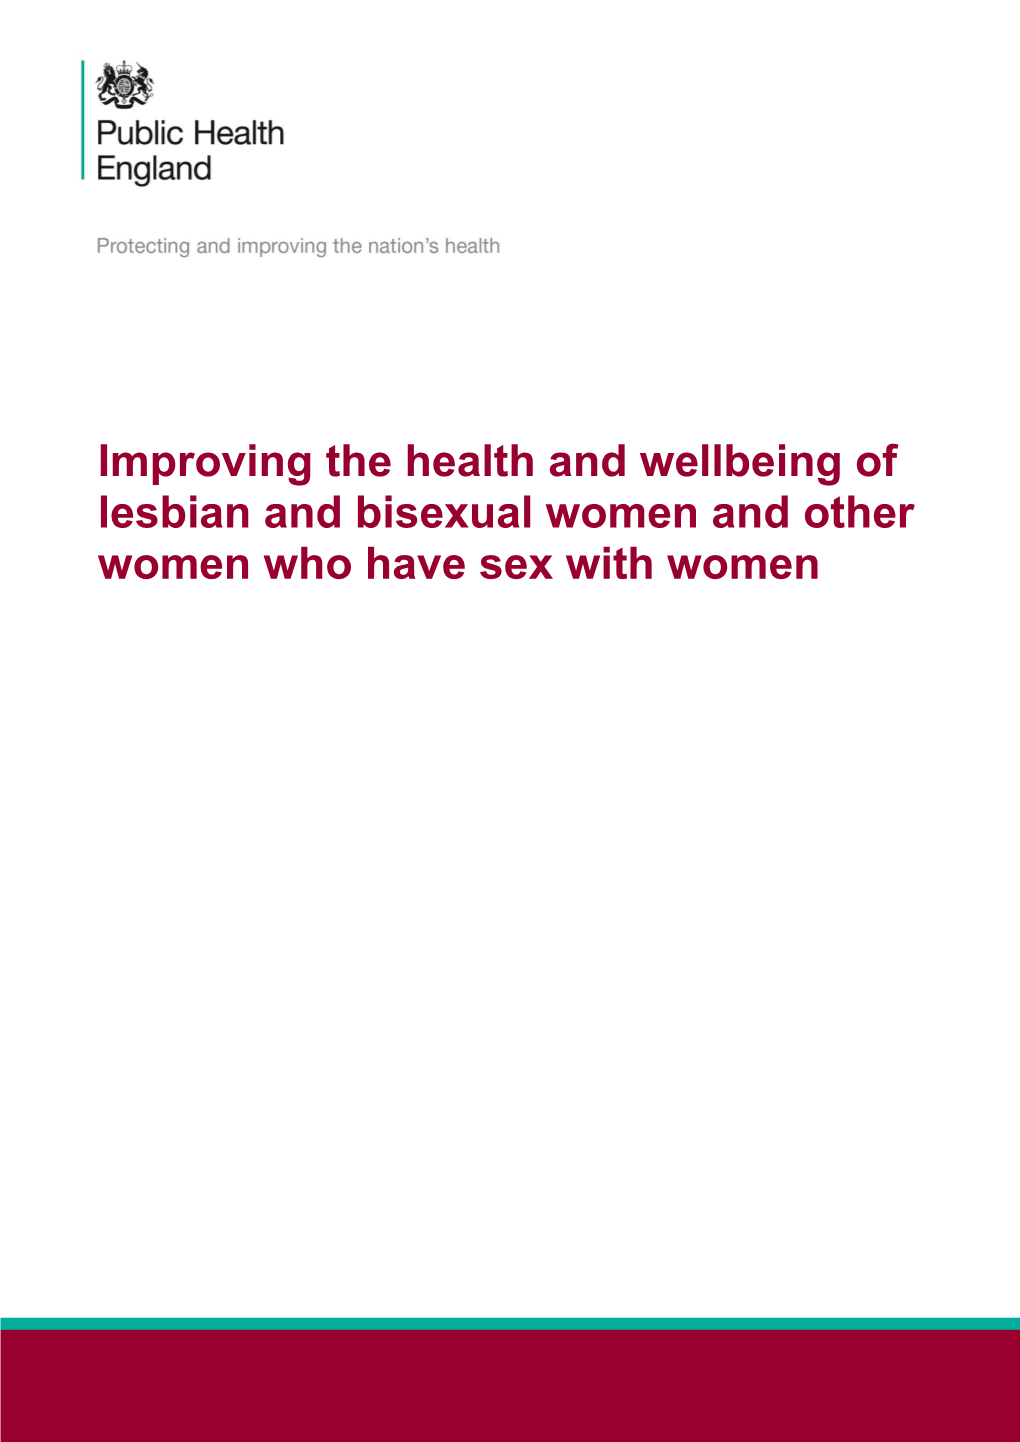 Improving the Health and Wellbeing of Lesbian and Bisexual Women and Other Women Who Have Sex with Women